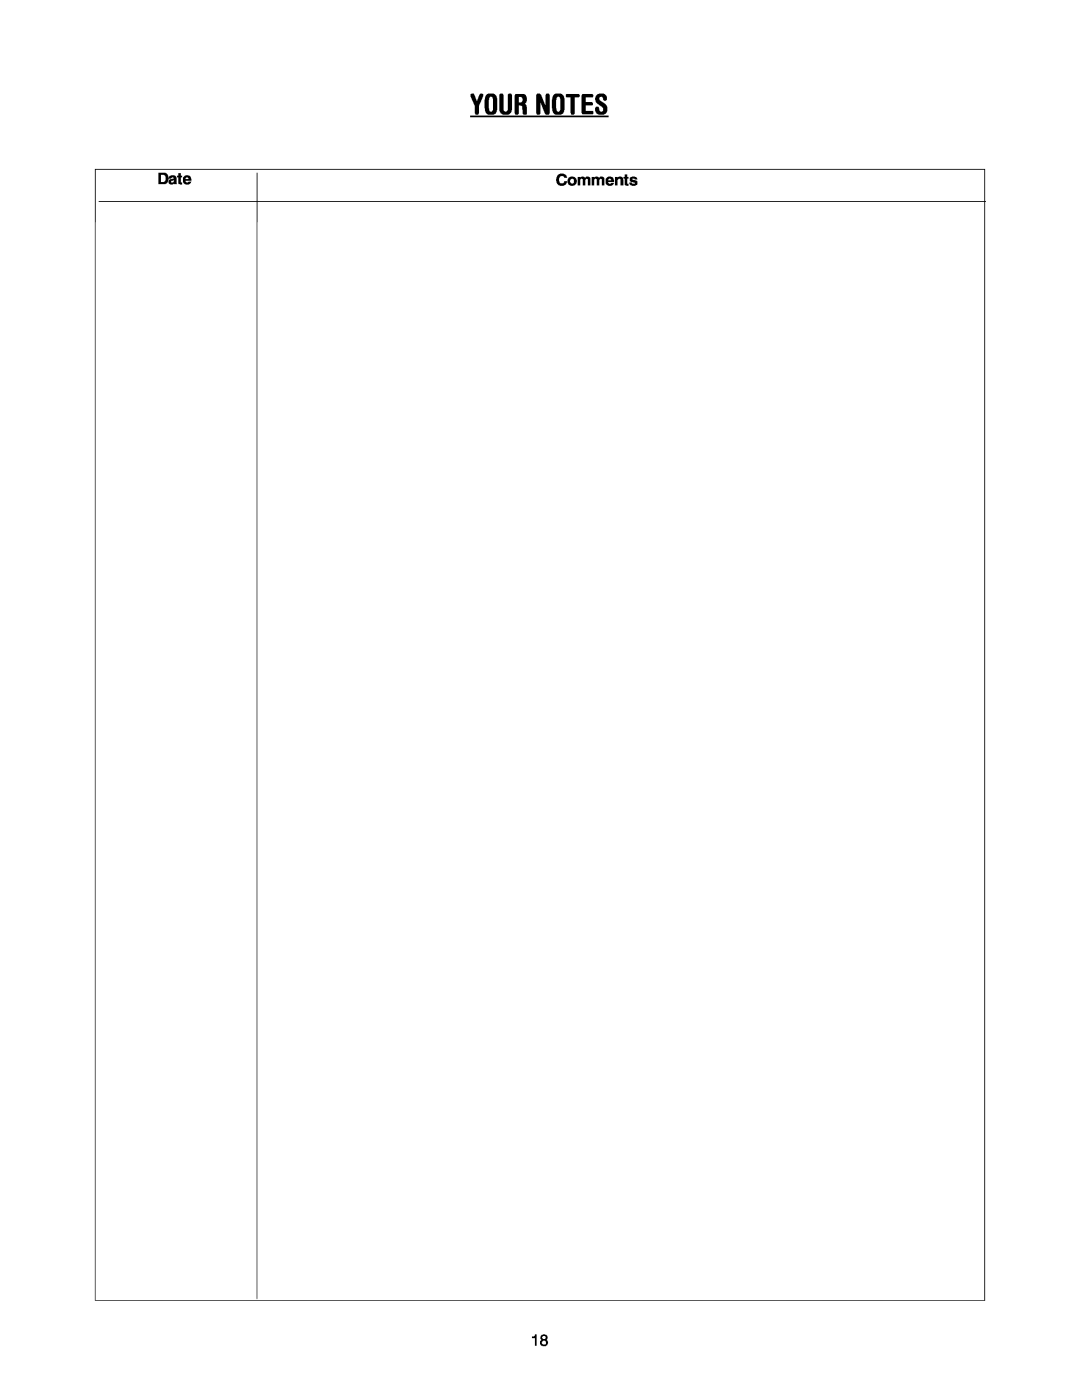 MTD 410 through 419 manual Your Notes, Date, Comments 